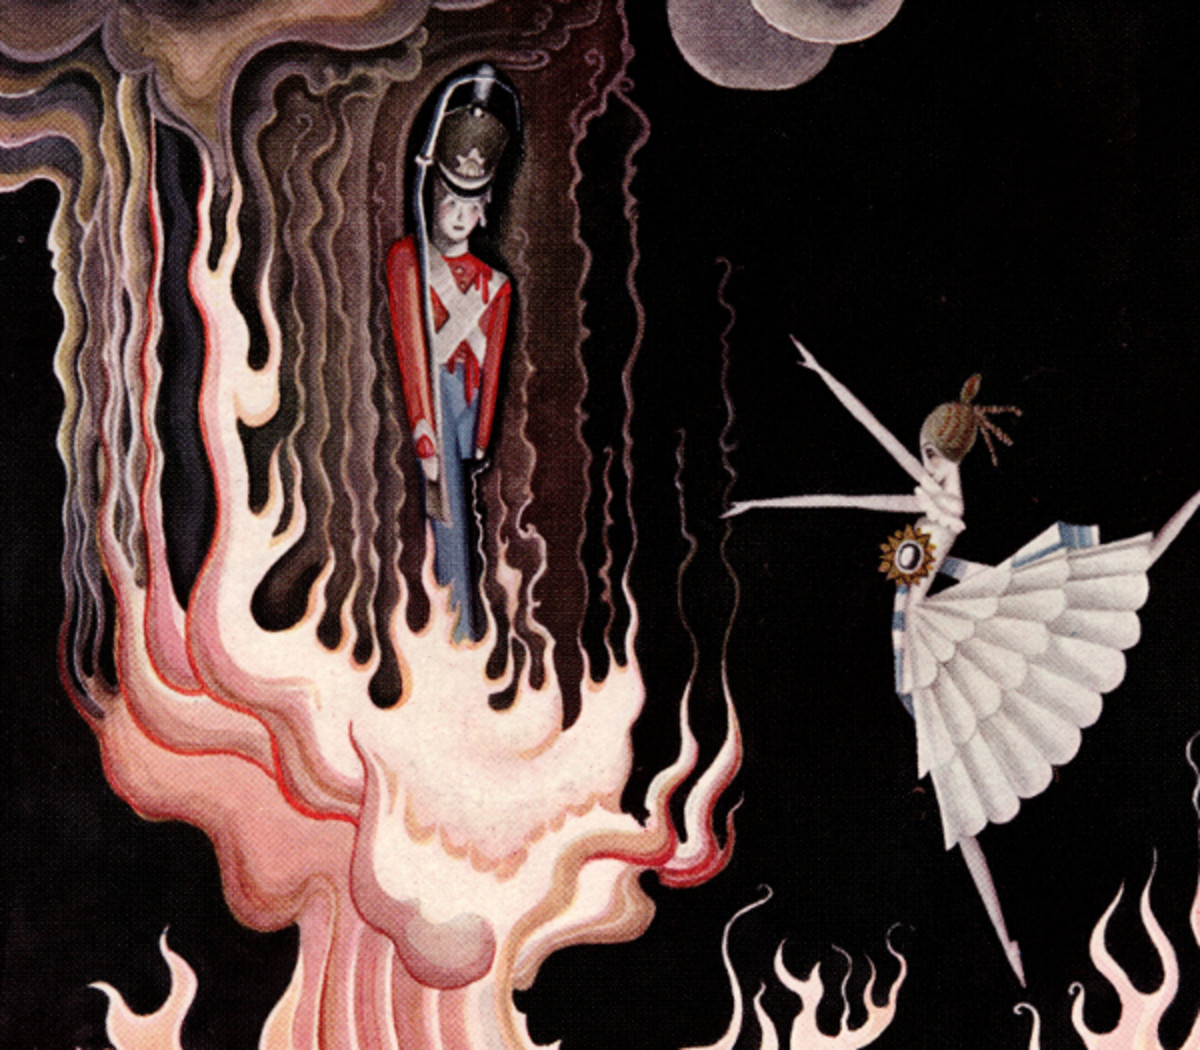 Here we show a portion of 'The Hardy Tin Soldier' - a design by Kay Nielsen from his suite published in 